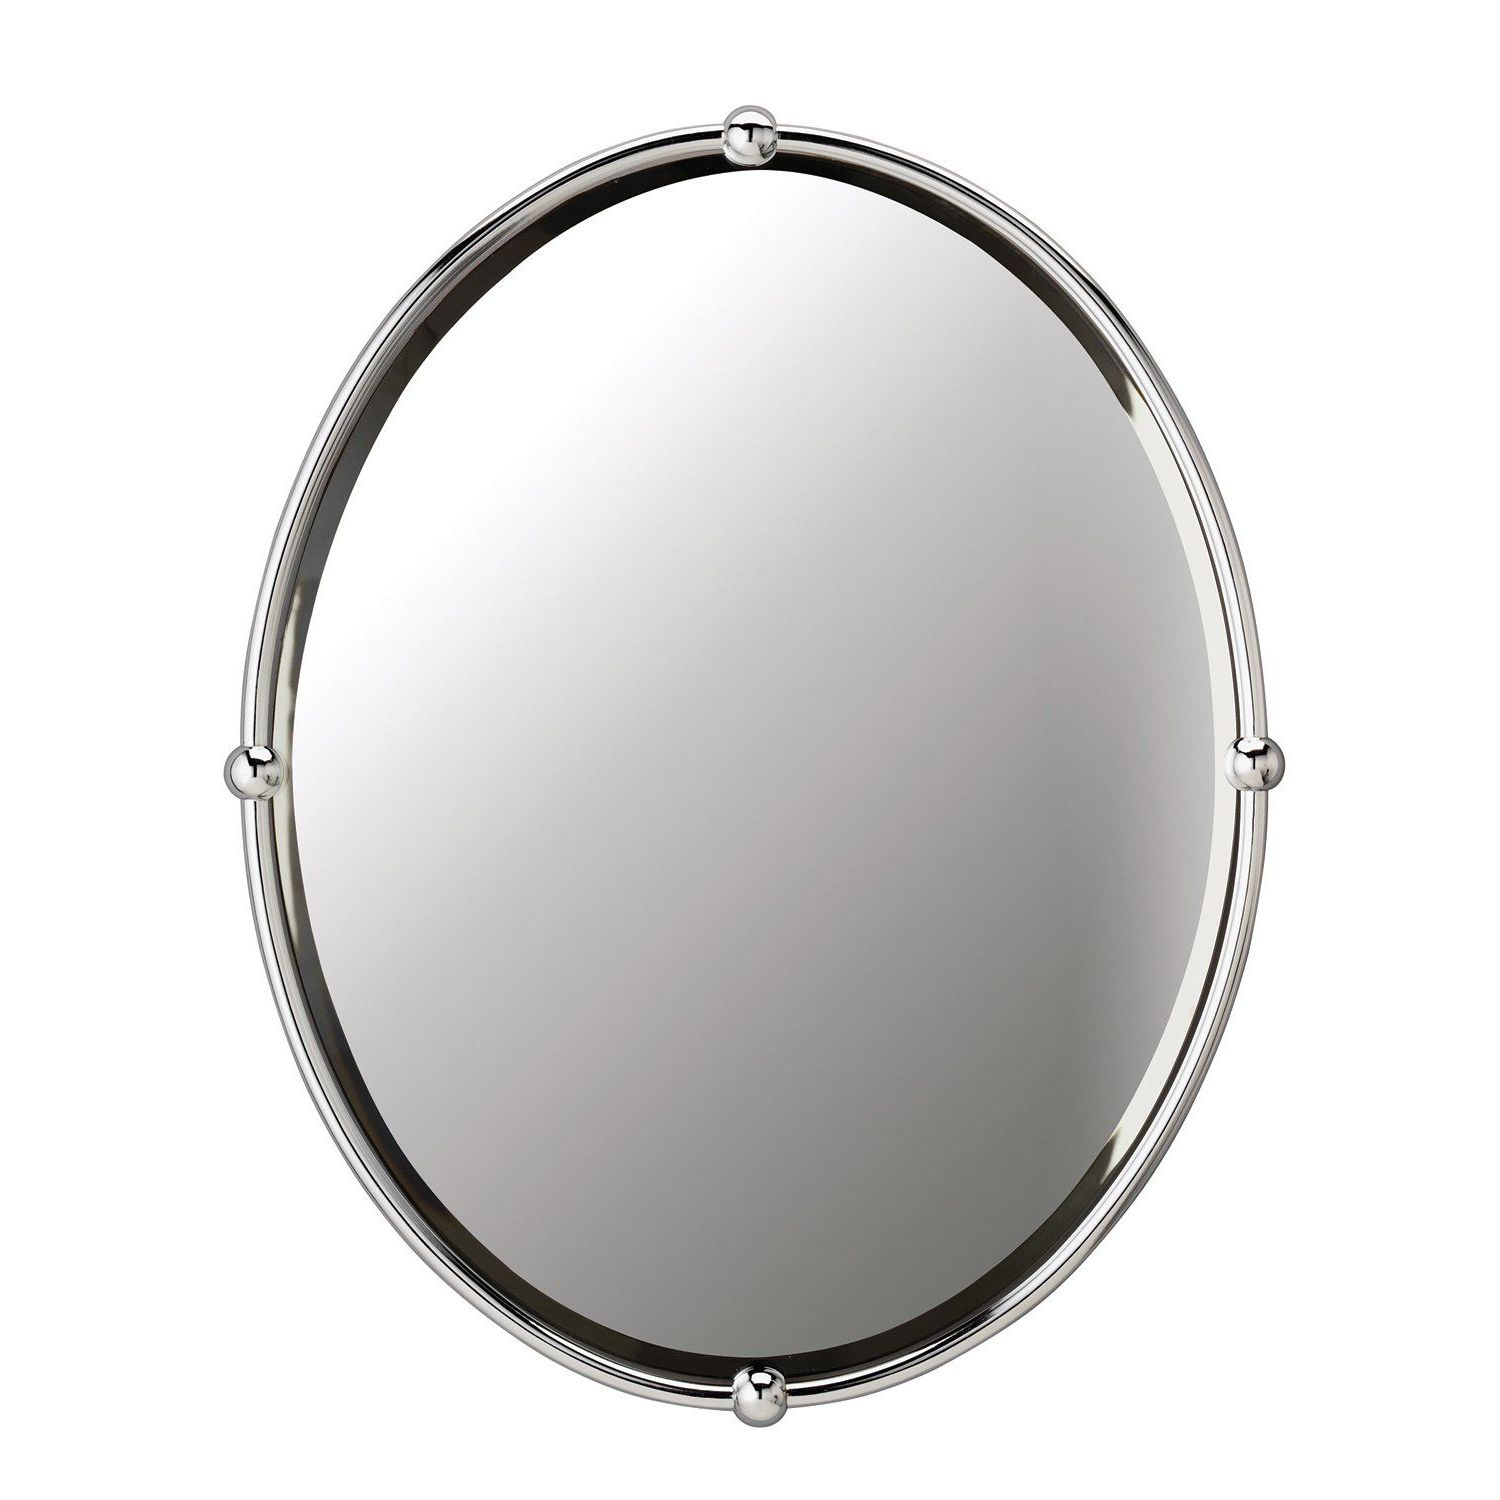 Mirror, Oval Mirror Regarding Oval Beveled Frameless Wall Mirrors (View 10 of 15)